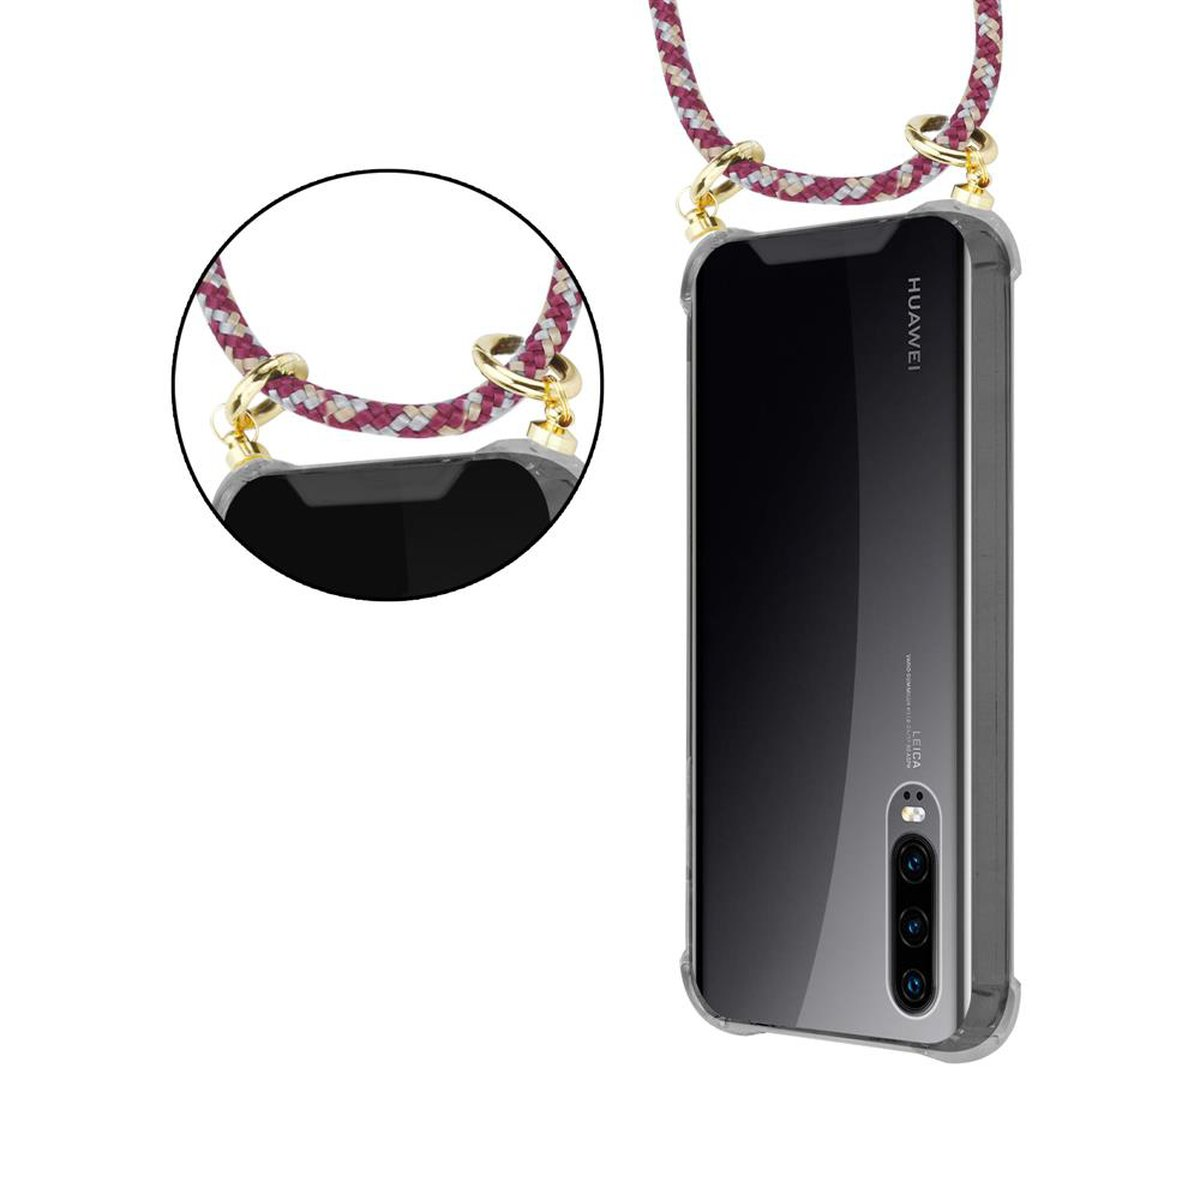 CADORABO Handy Kette mit abnehmbarer Hülle, und GELB Huawei, Ringen, Band P30, ROT WEIß Backcover, Gold Kordel